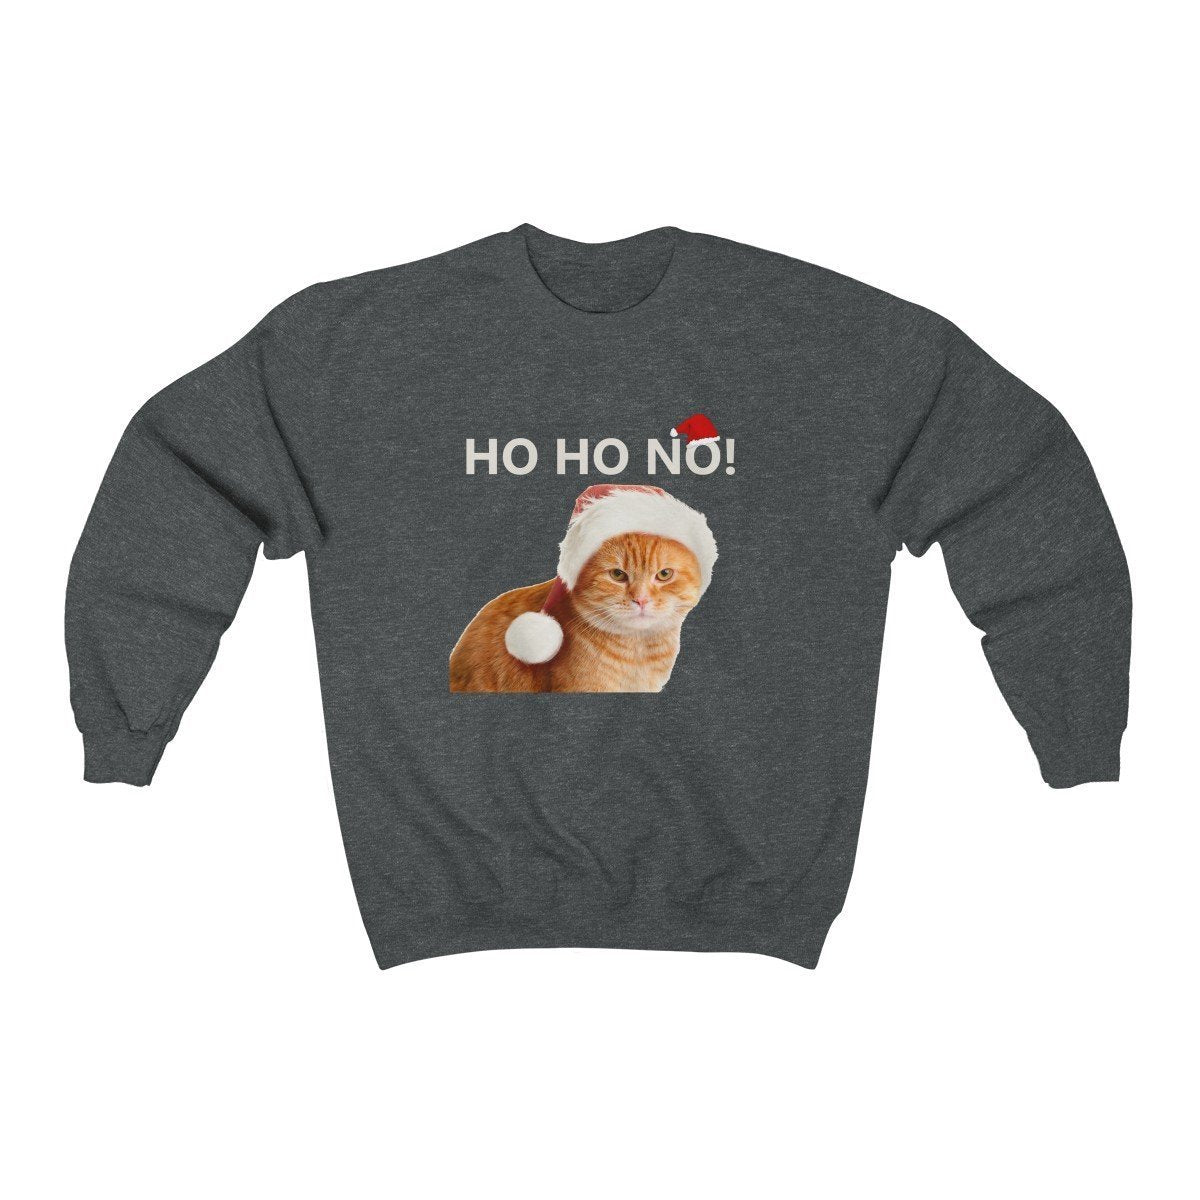 Ugly Cat Christmas Sweater Featuring a Grumpy Tabby Cat and the Print Ho Ho No